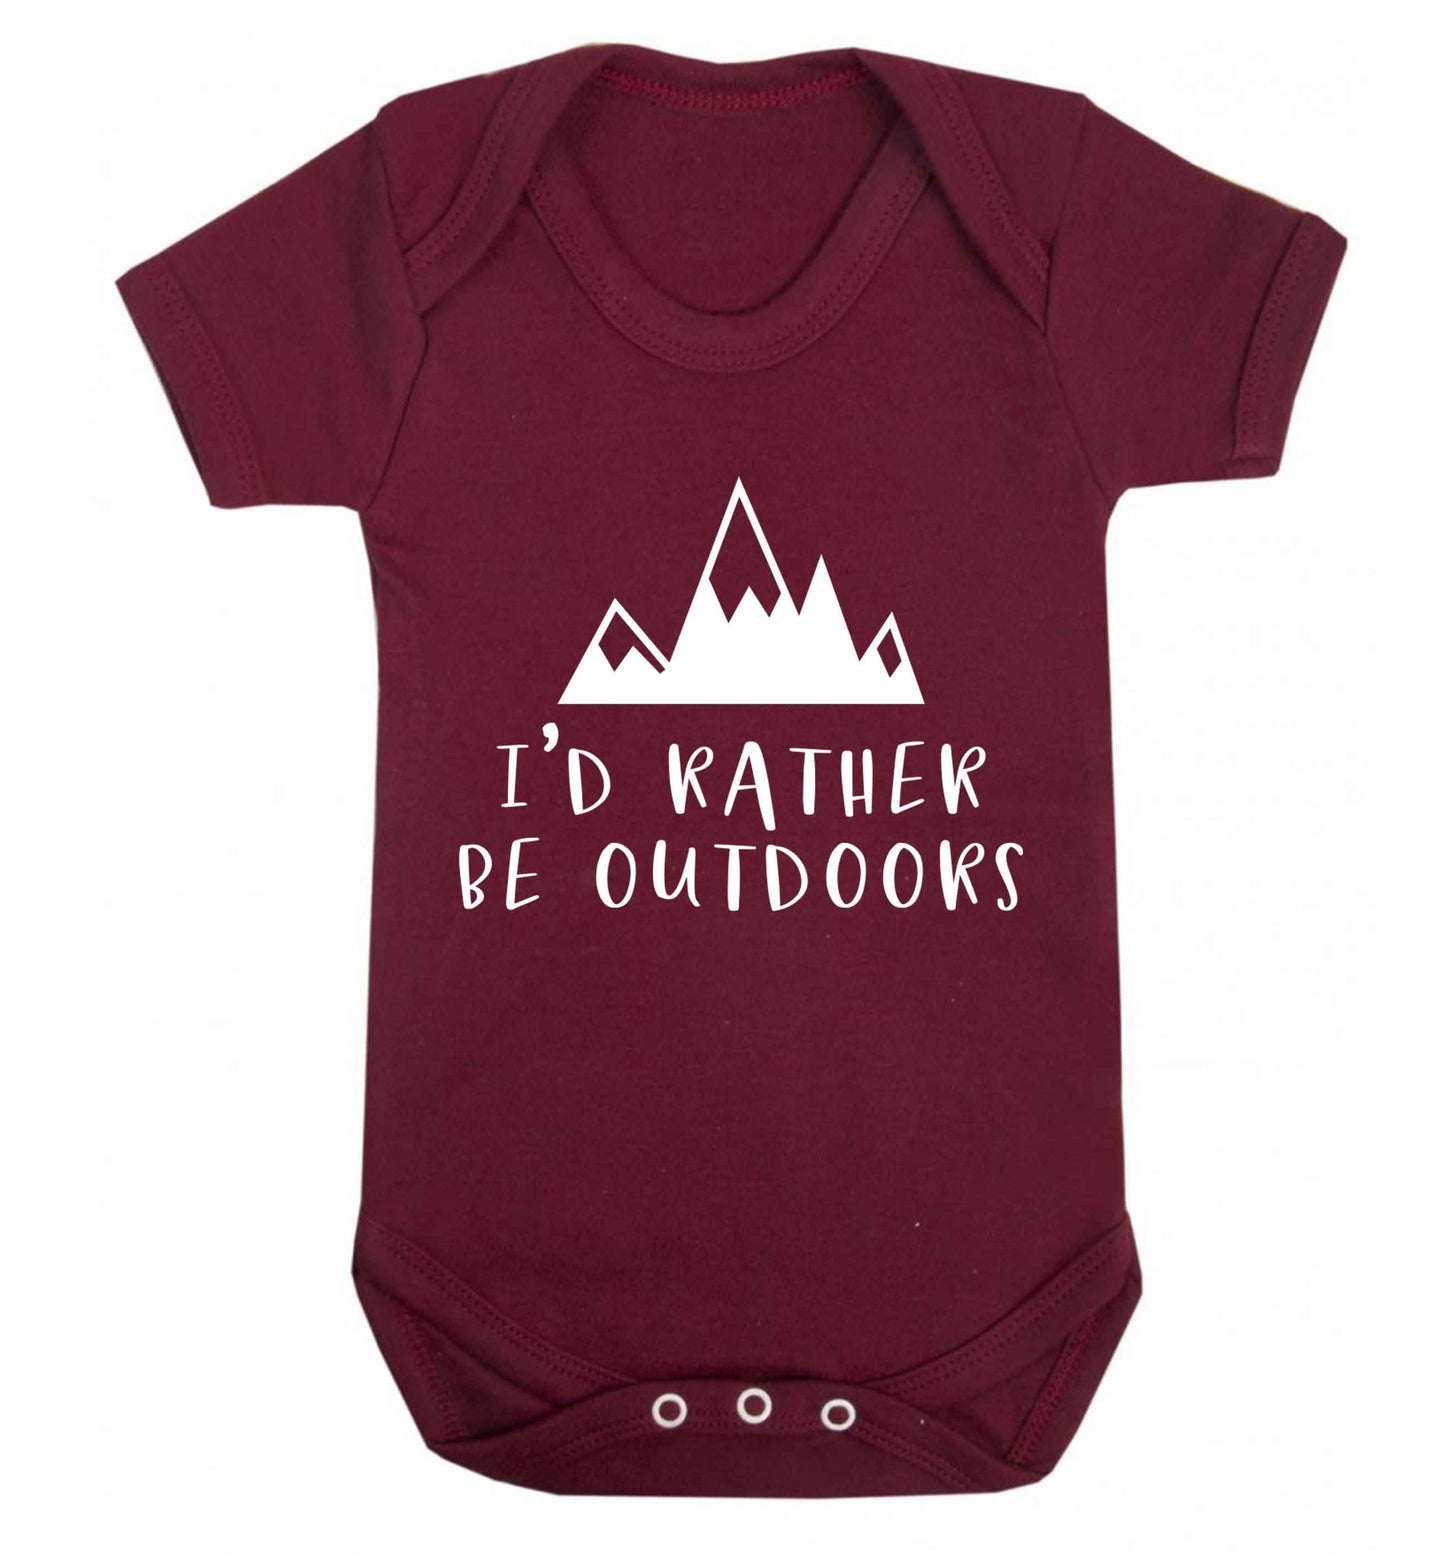 I'd rather be outdoors Baby Vest maroon 18-24 months